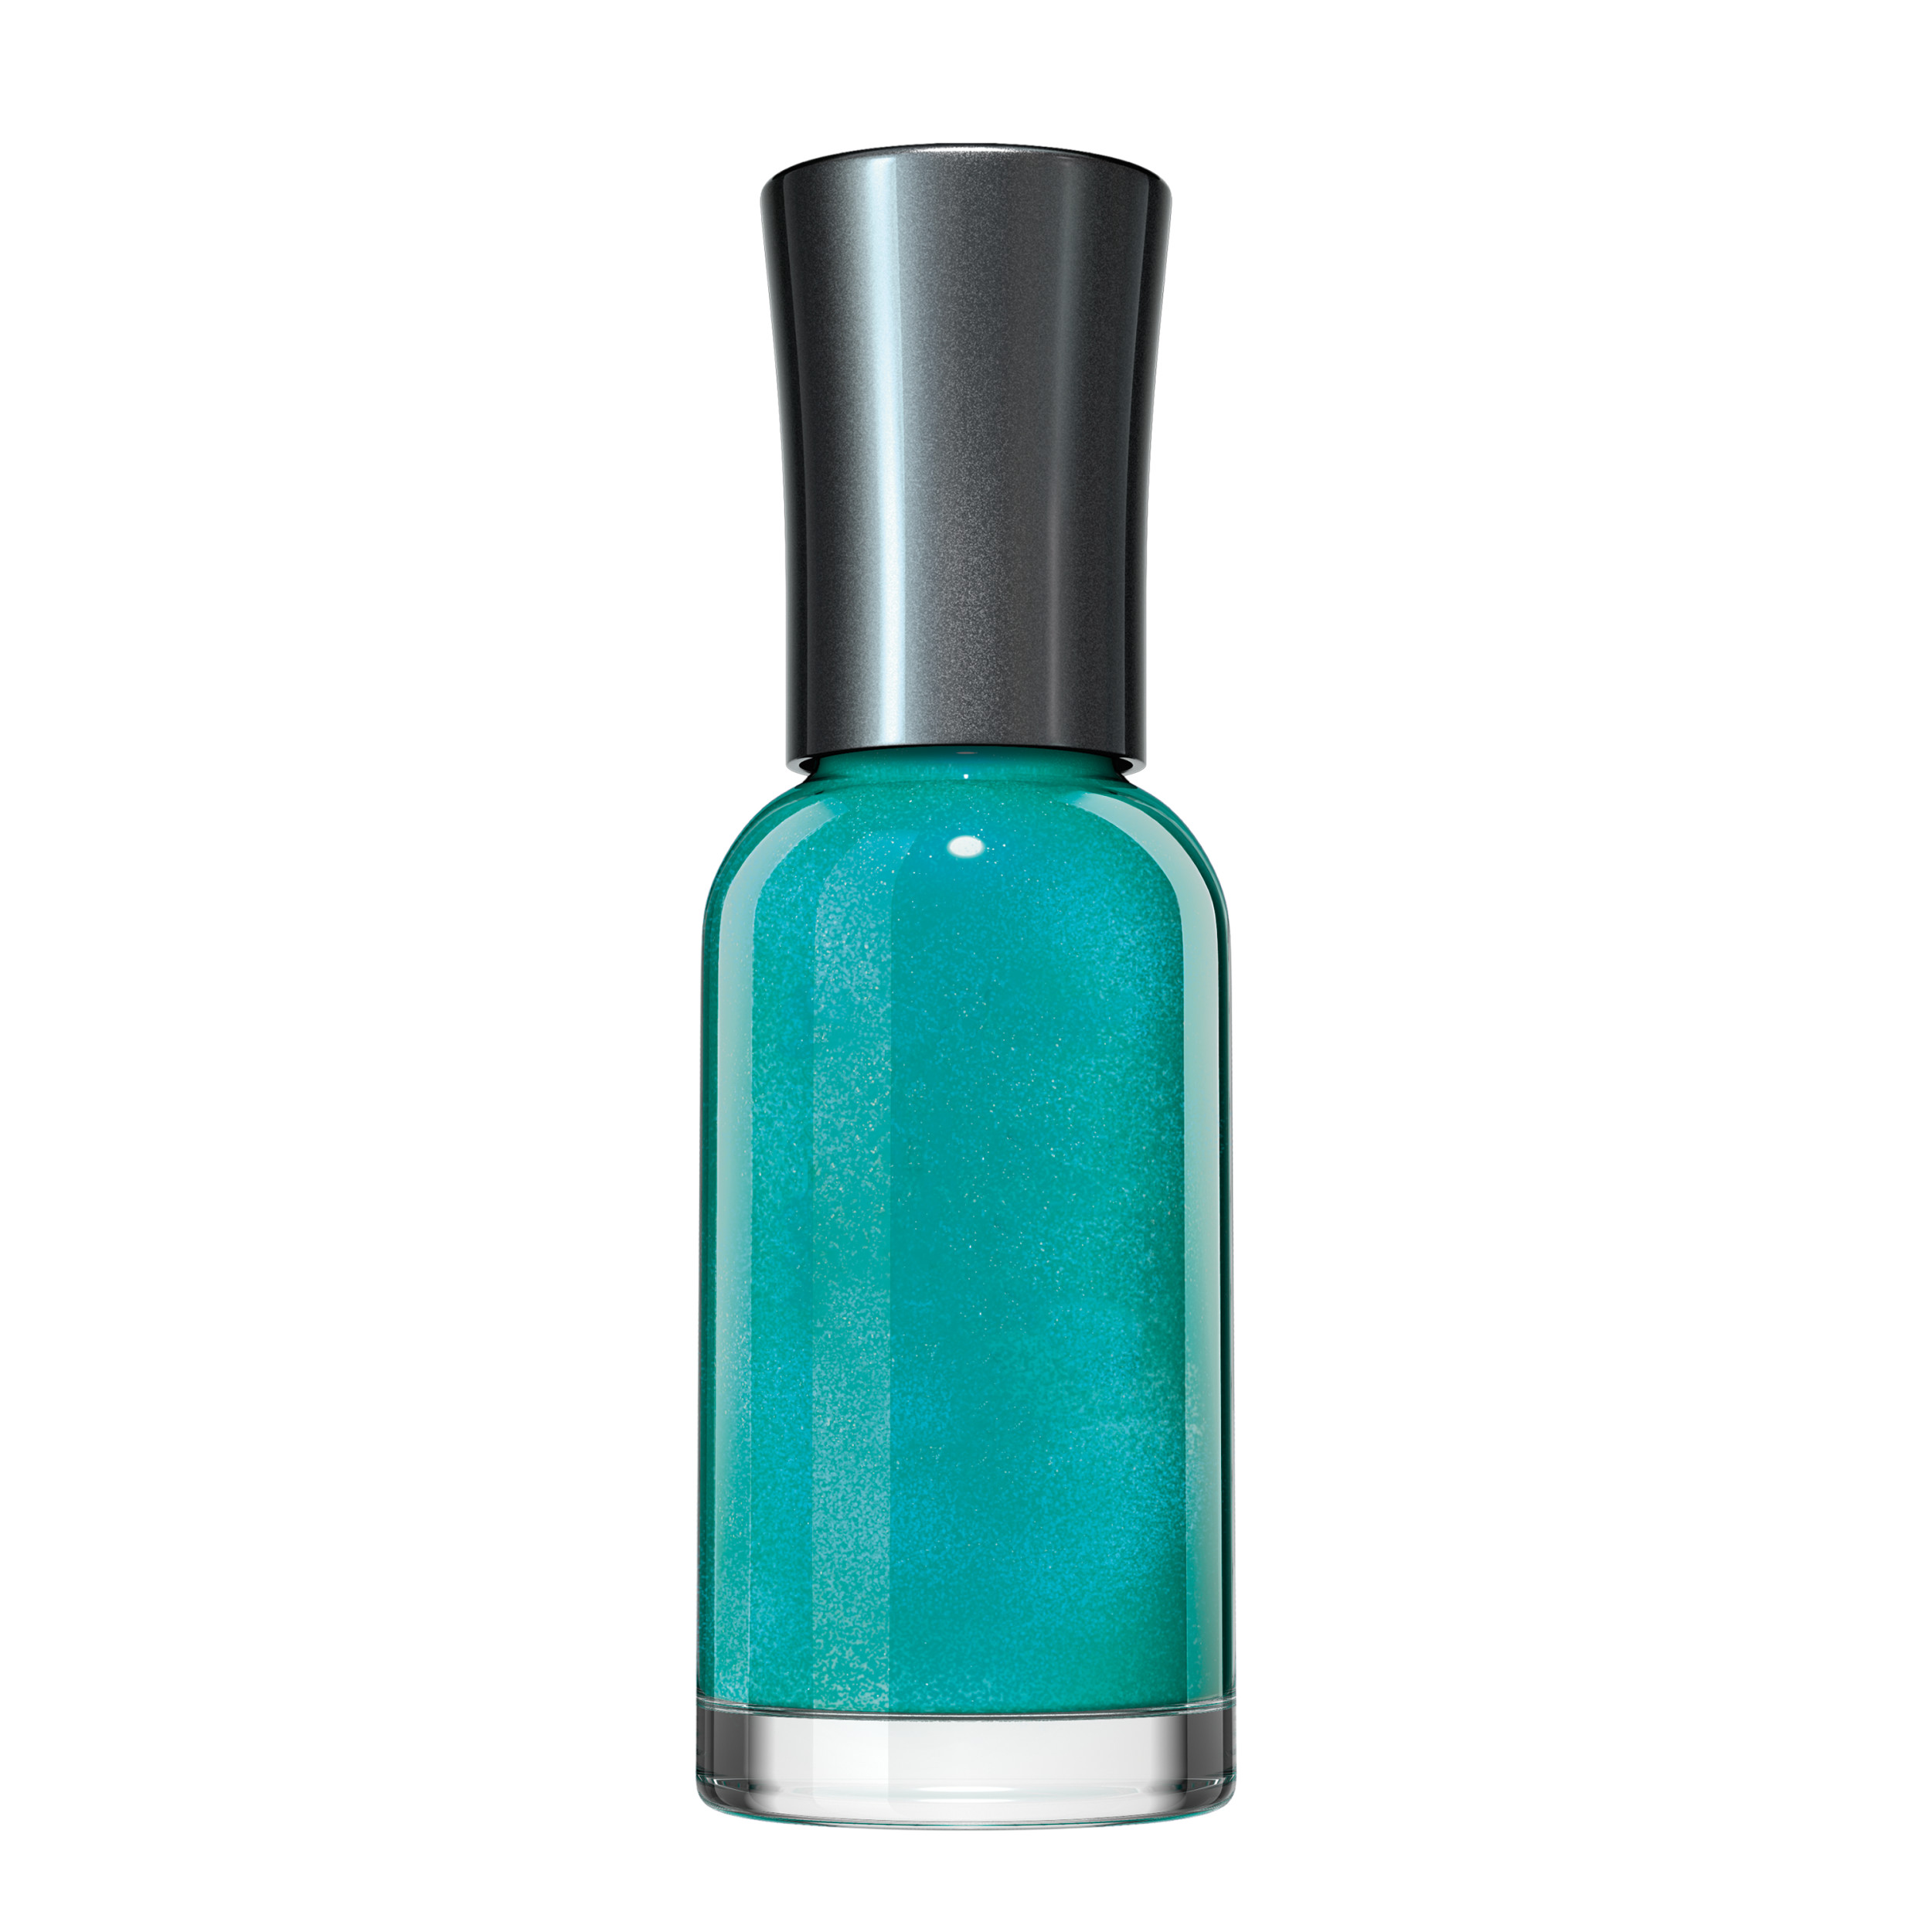 Sally Hansen Xtreme Wear Nail Color, Jazzy Jade, 0.4 oz, Color Nail Polish, Nail Polish, Quick Dry Nail Polish, Nail Polish Colors, Chip Resistant, Bold Color - image 5 of 10